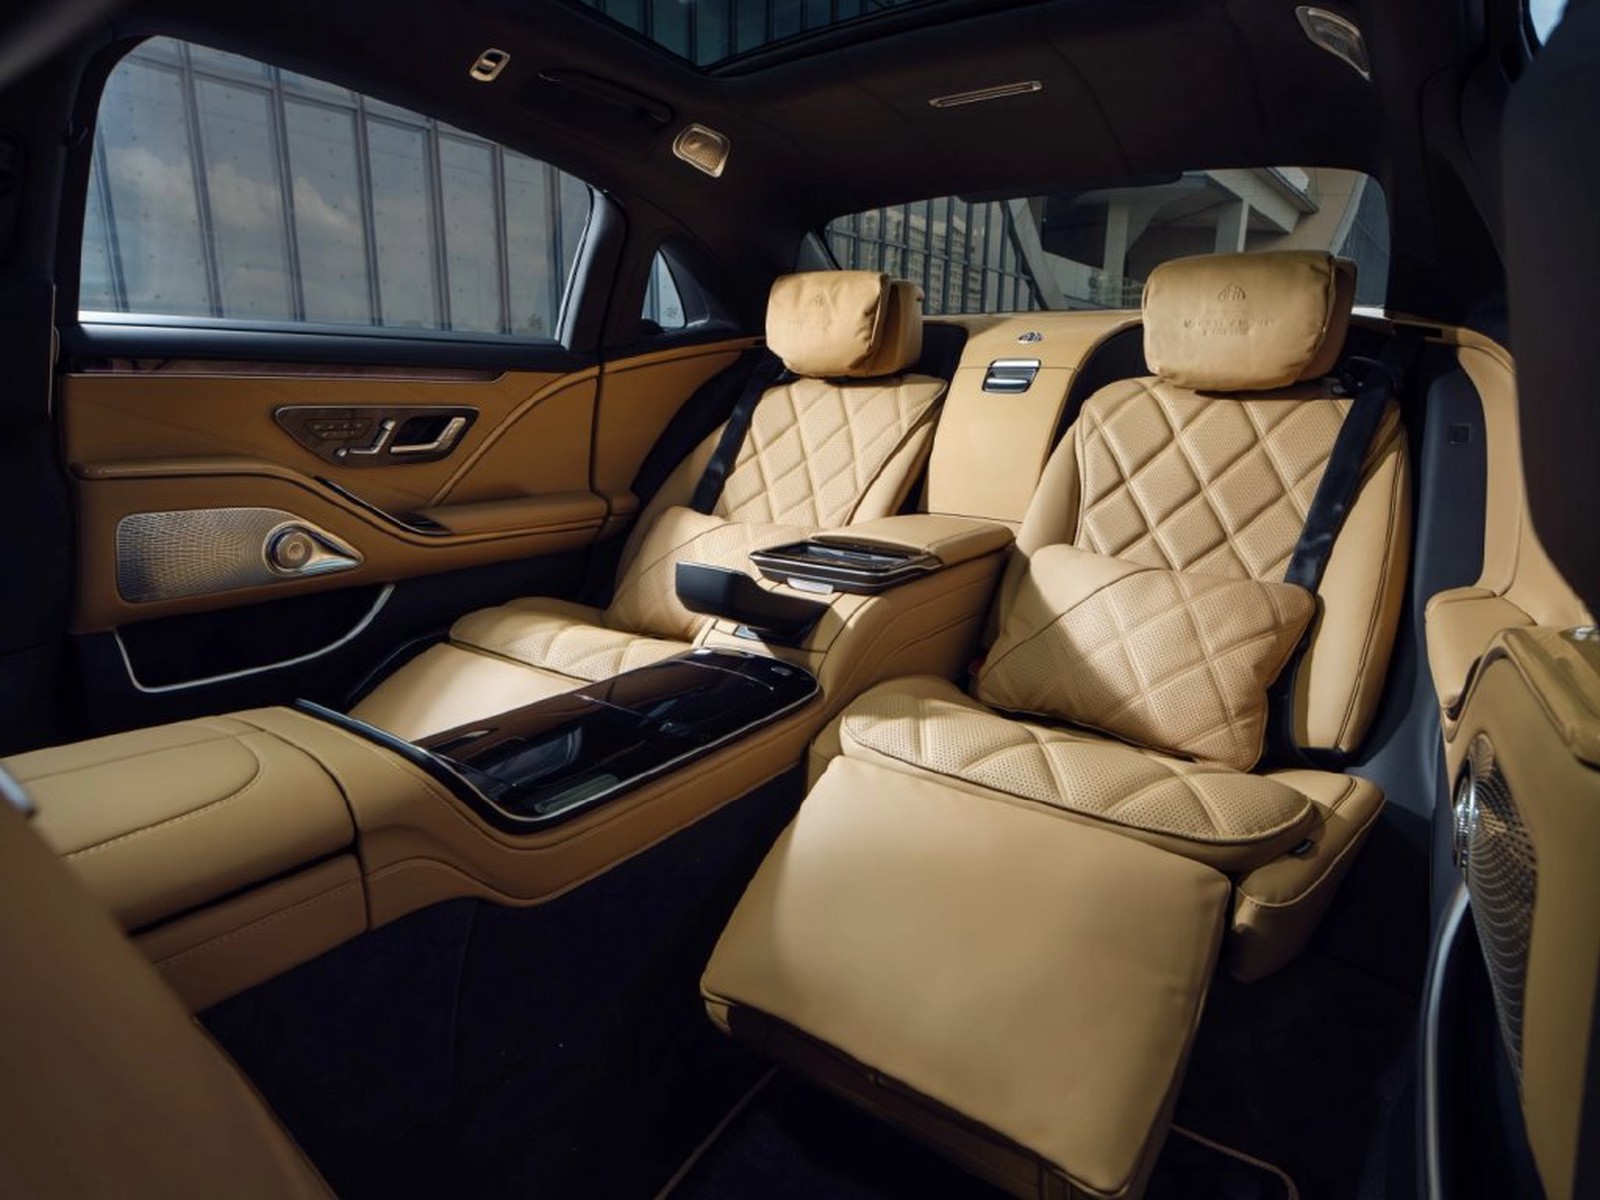 Mercedes-Benz and Virgil Abloh Collaborated on a Maybach S-Class